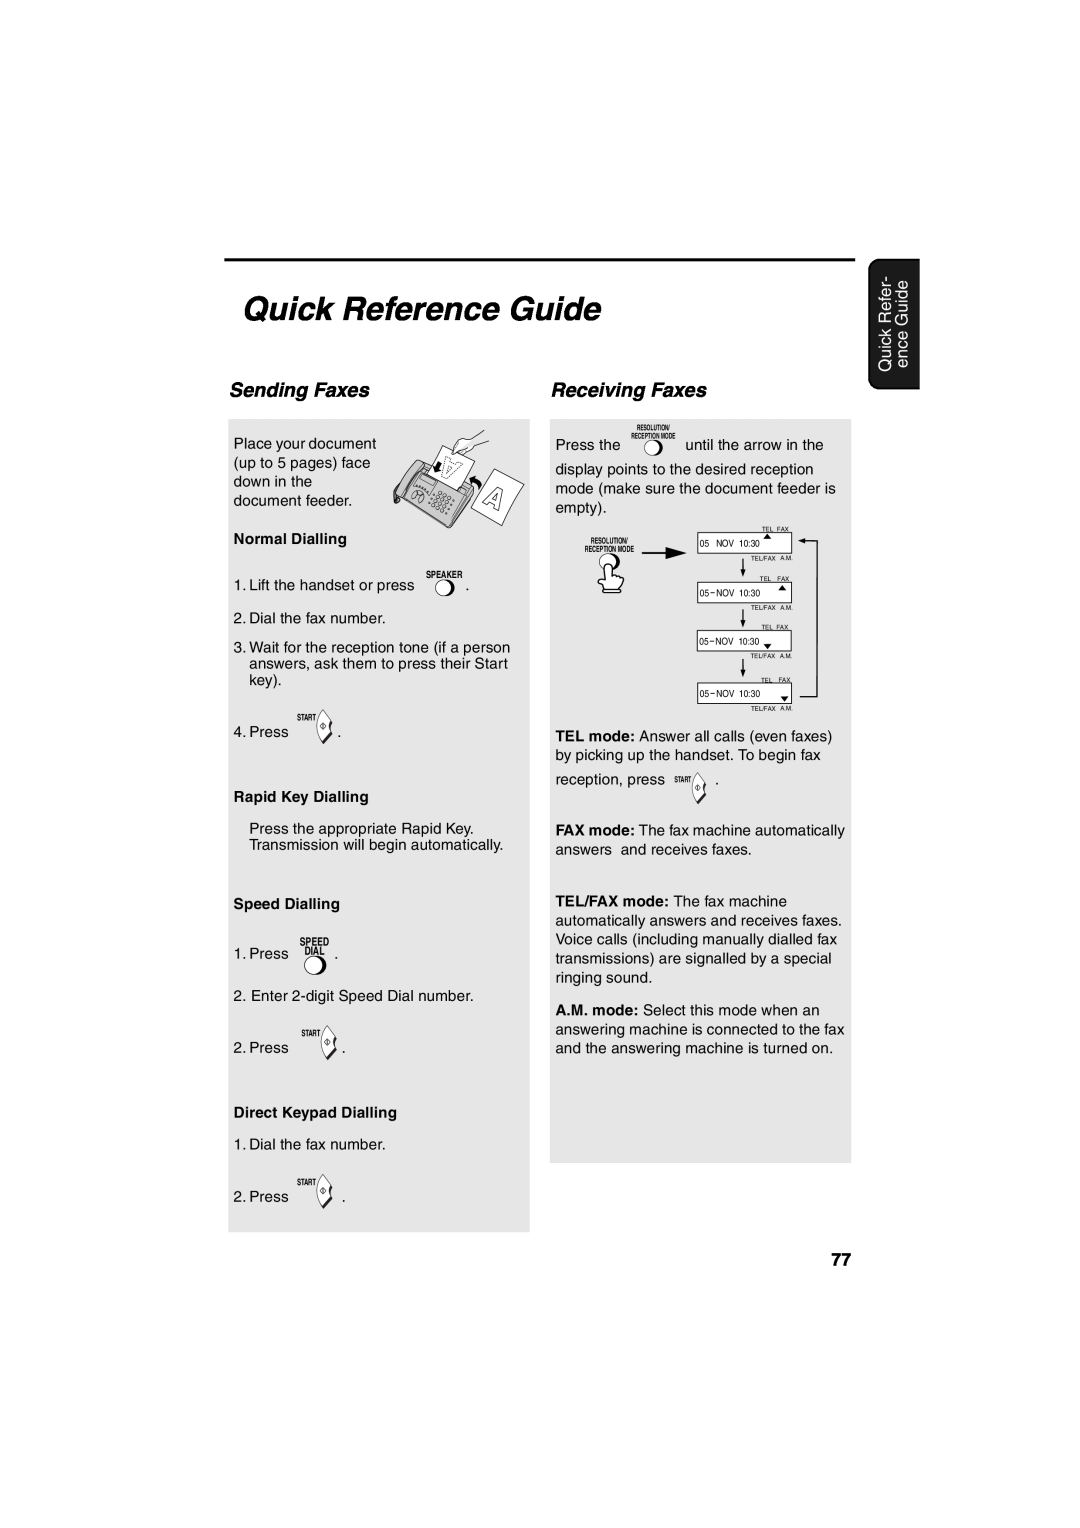 Sharp UX-61 Quick Reference Guide, Sending Faxes, Receiving Faxes, Normal Dialling, Rapid Key Dialling, Speed Dialling 